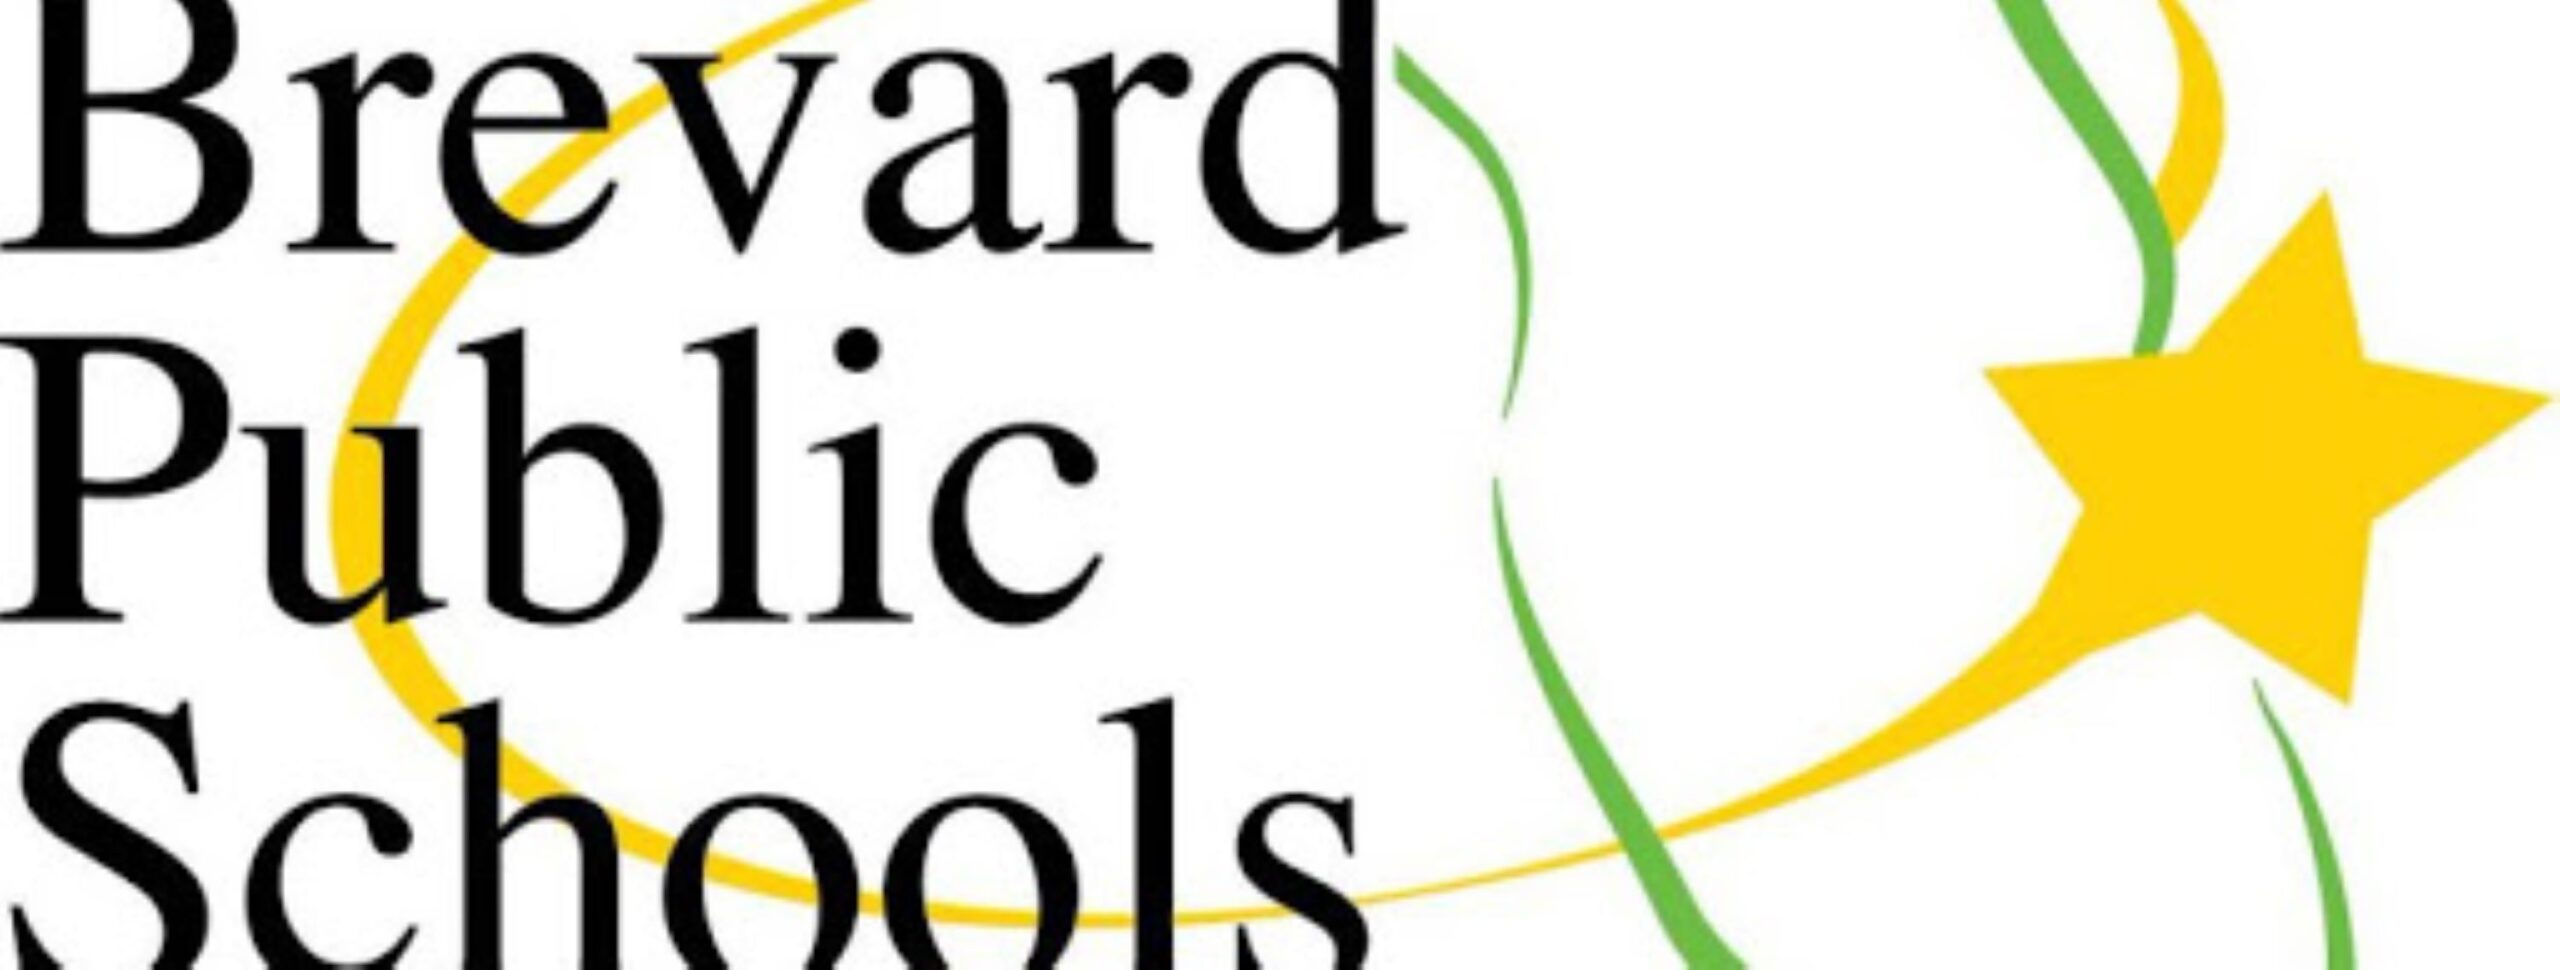 Political antiMoore text bearing Brevard Public Schools logo from Fine